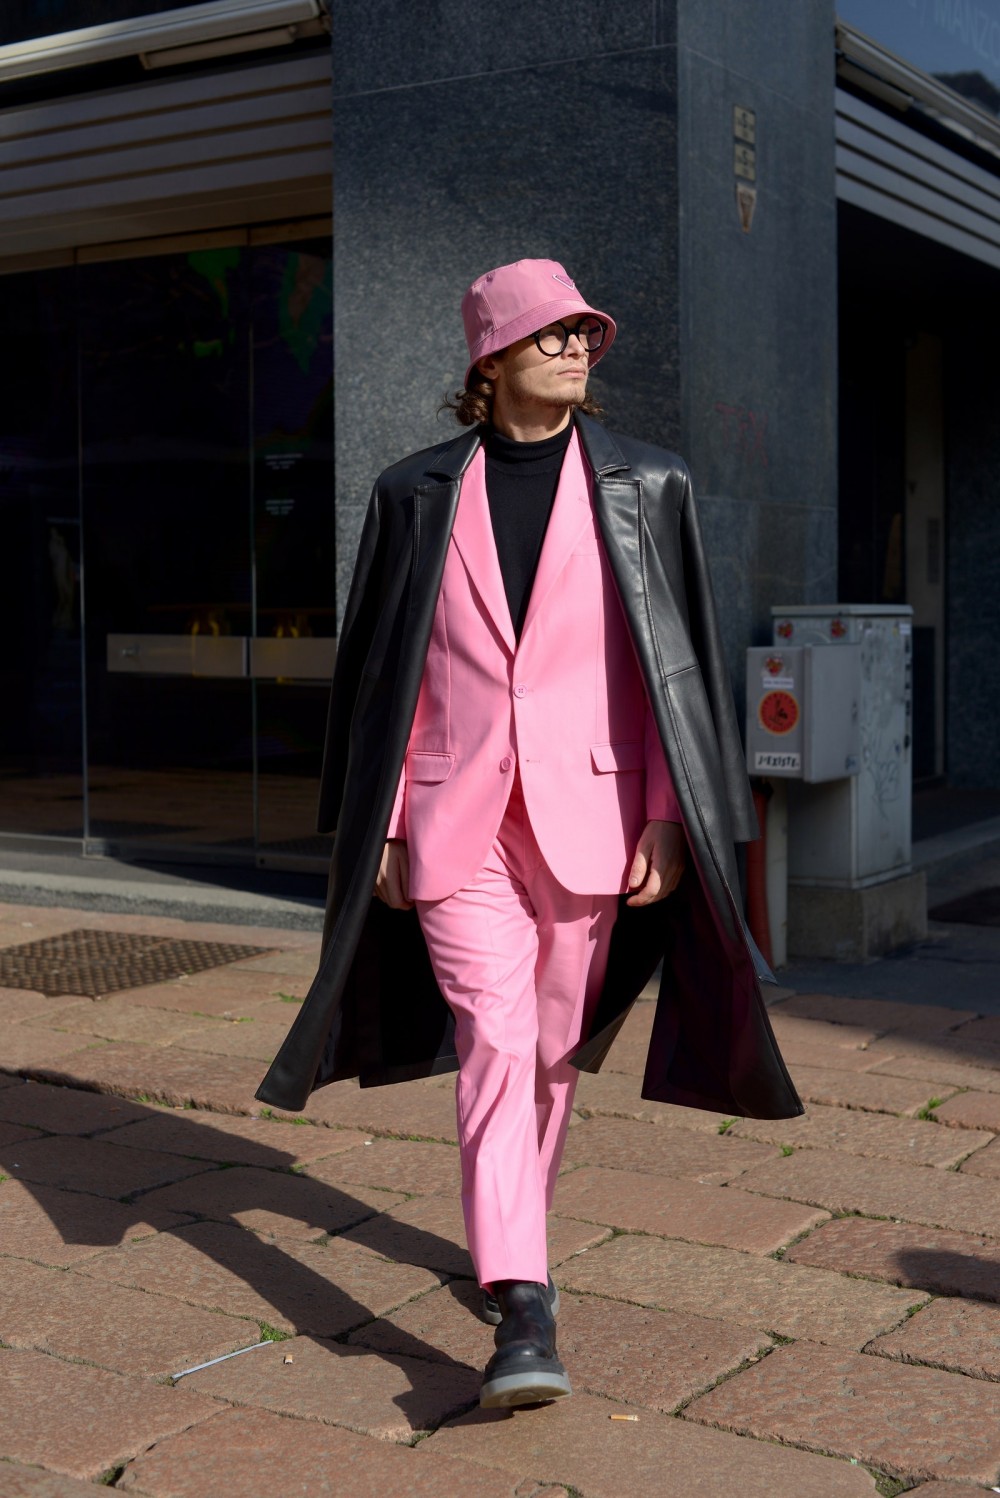 Signs of Spring These Bright Street Style Trends Are Ready to Bloom